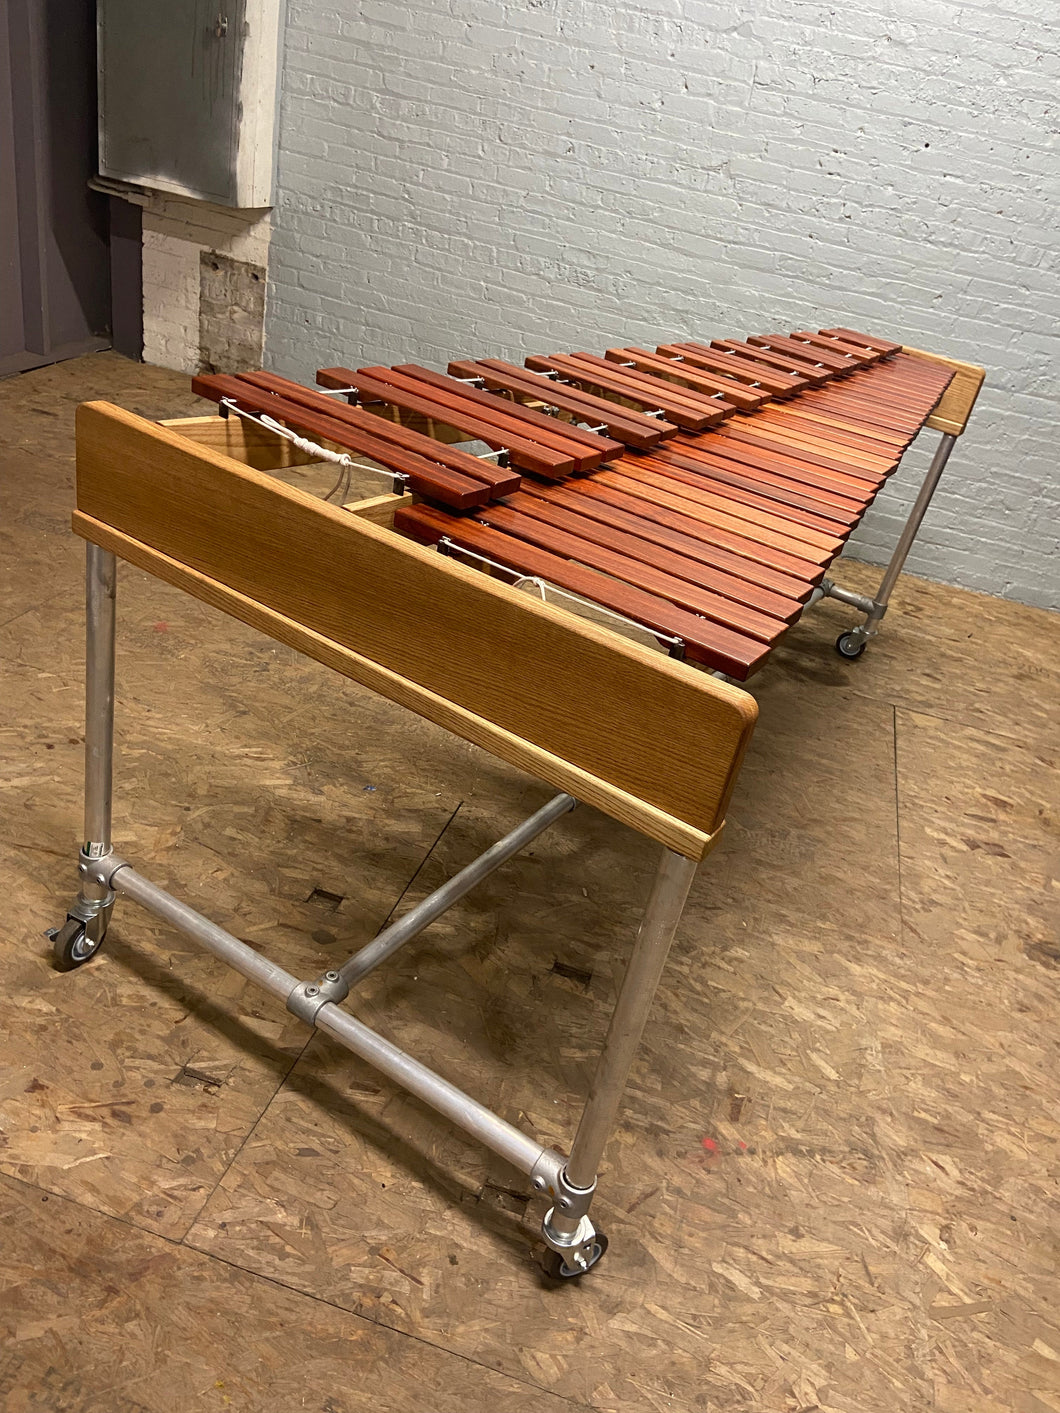 *New* 5.0 Octave Marimba with Mobile Frame